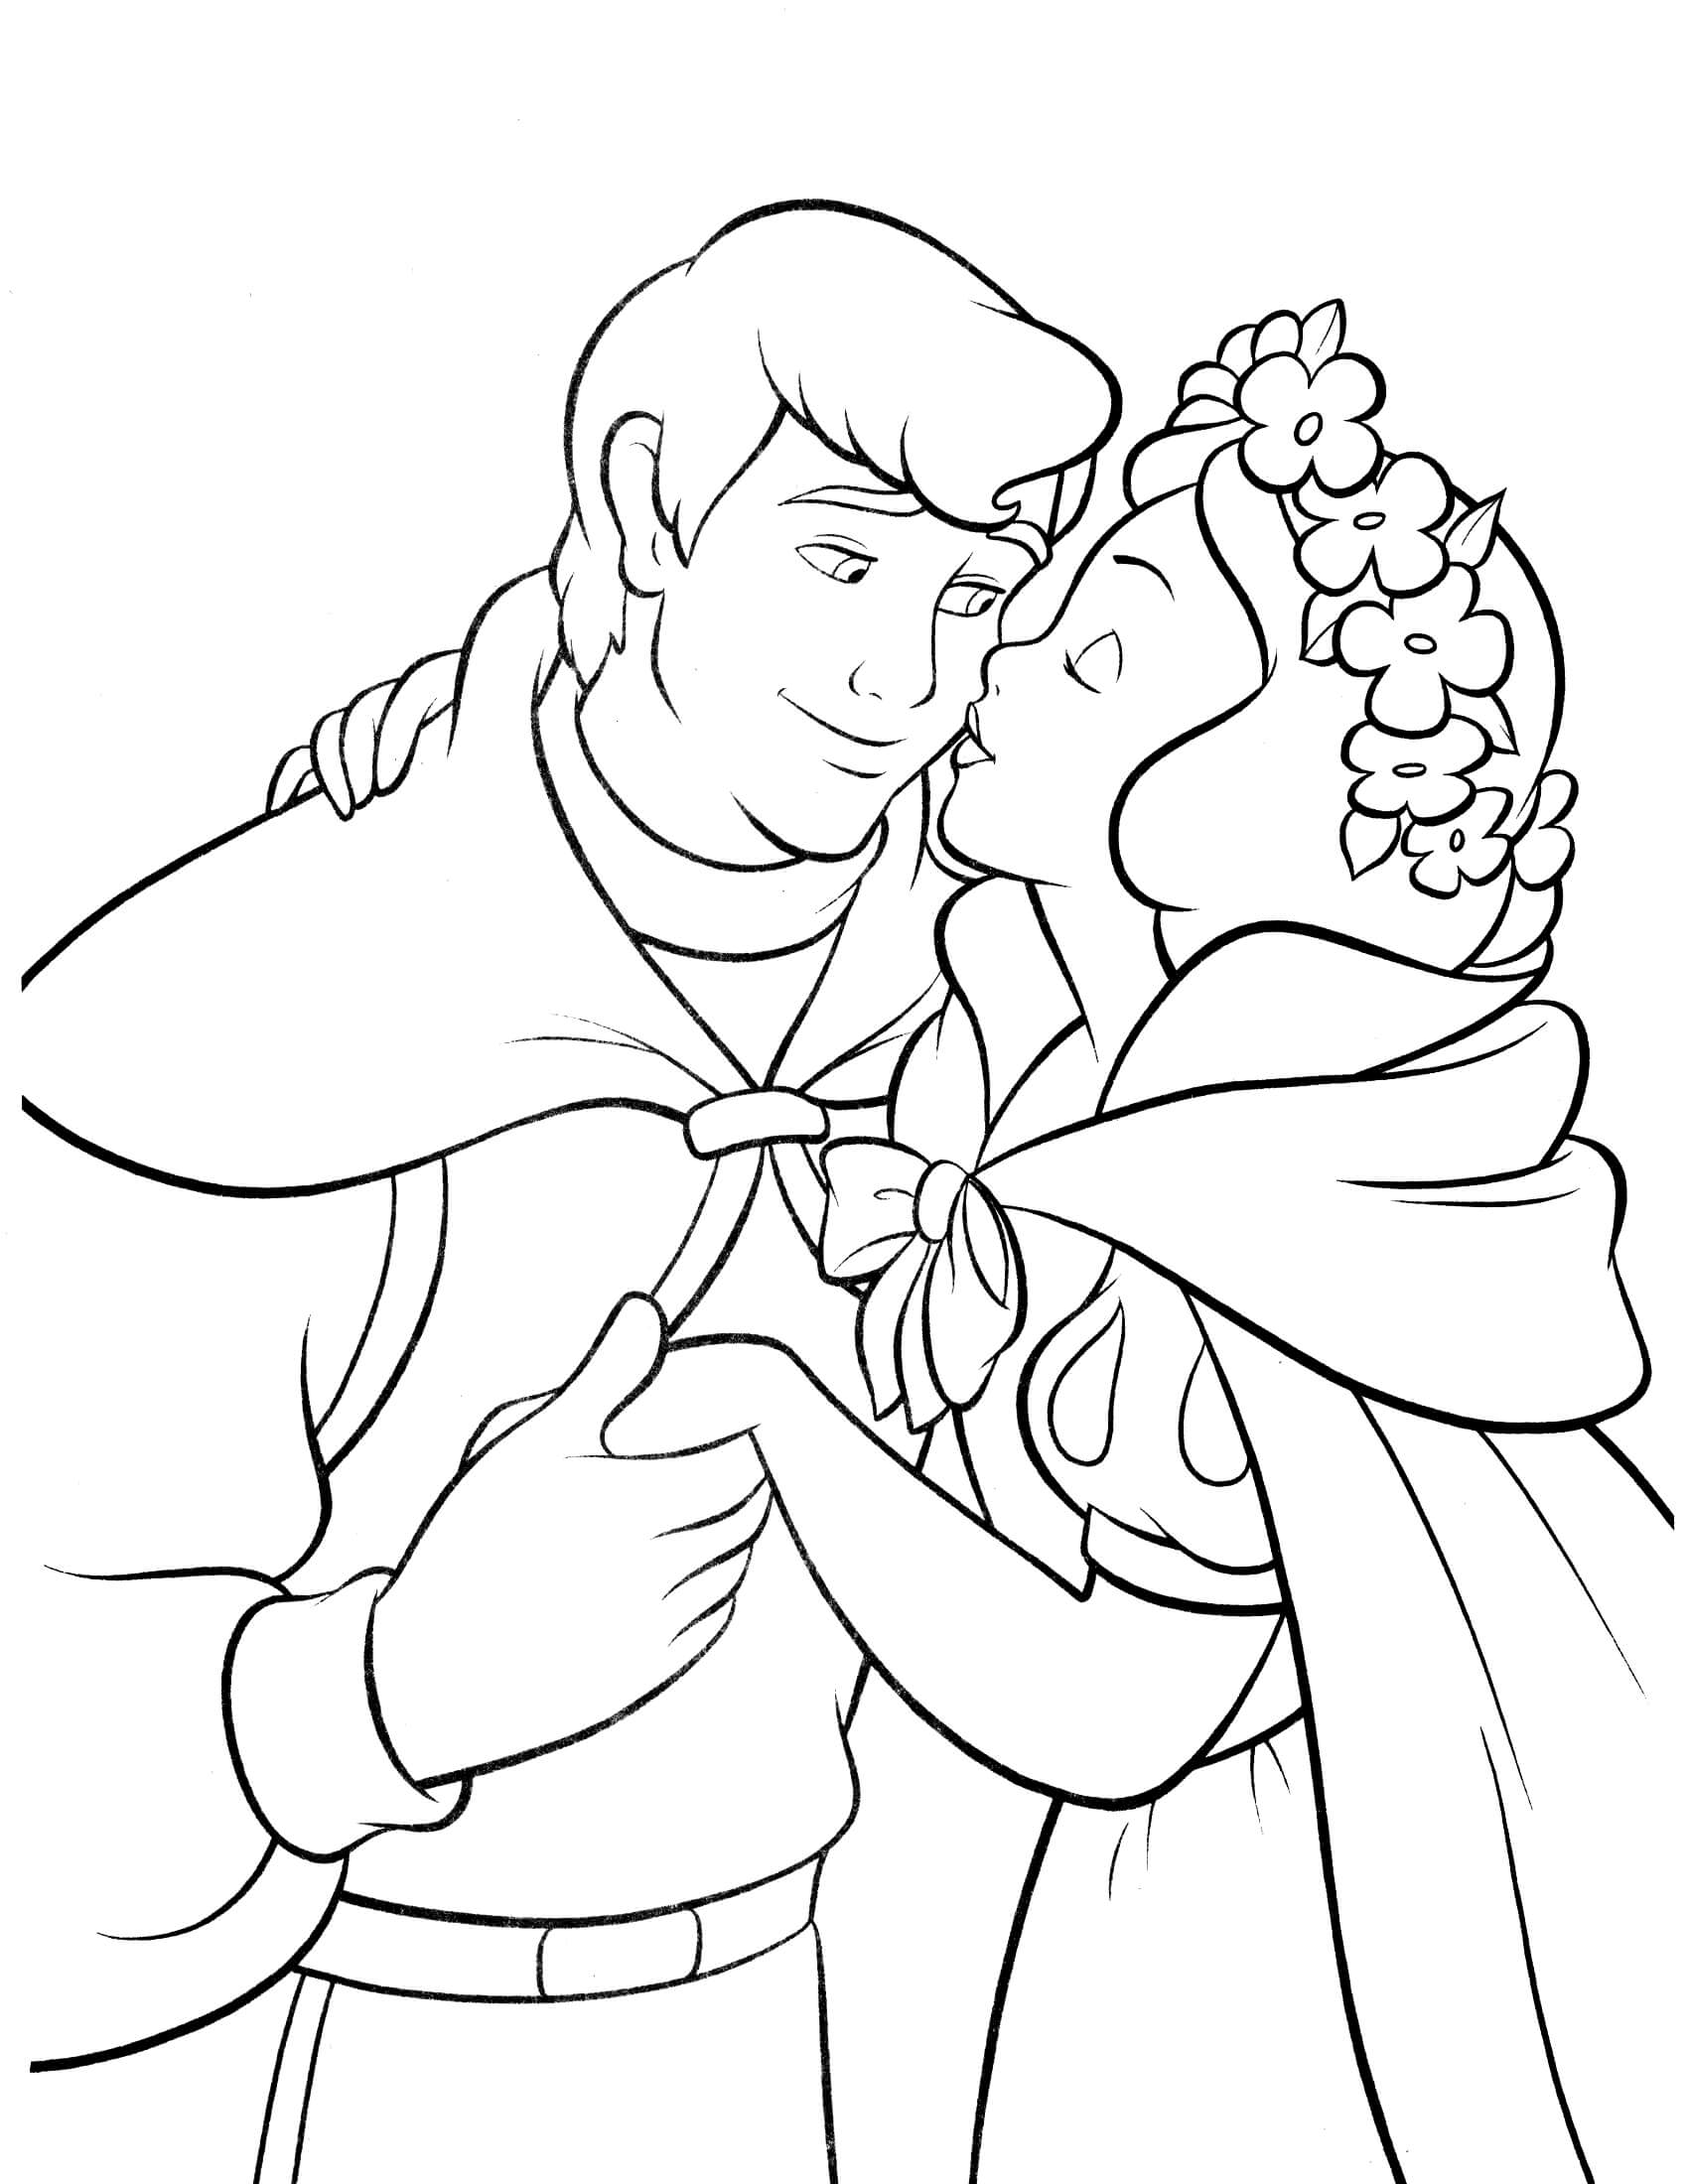 241 Simple Snow White Coloring Pages with Printable